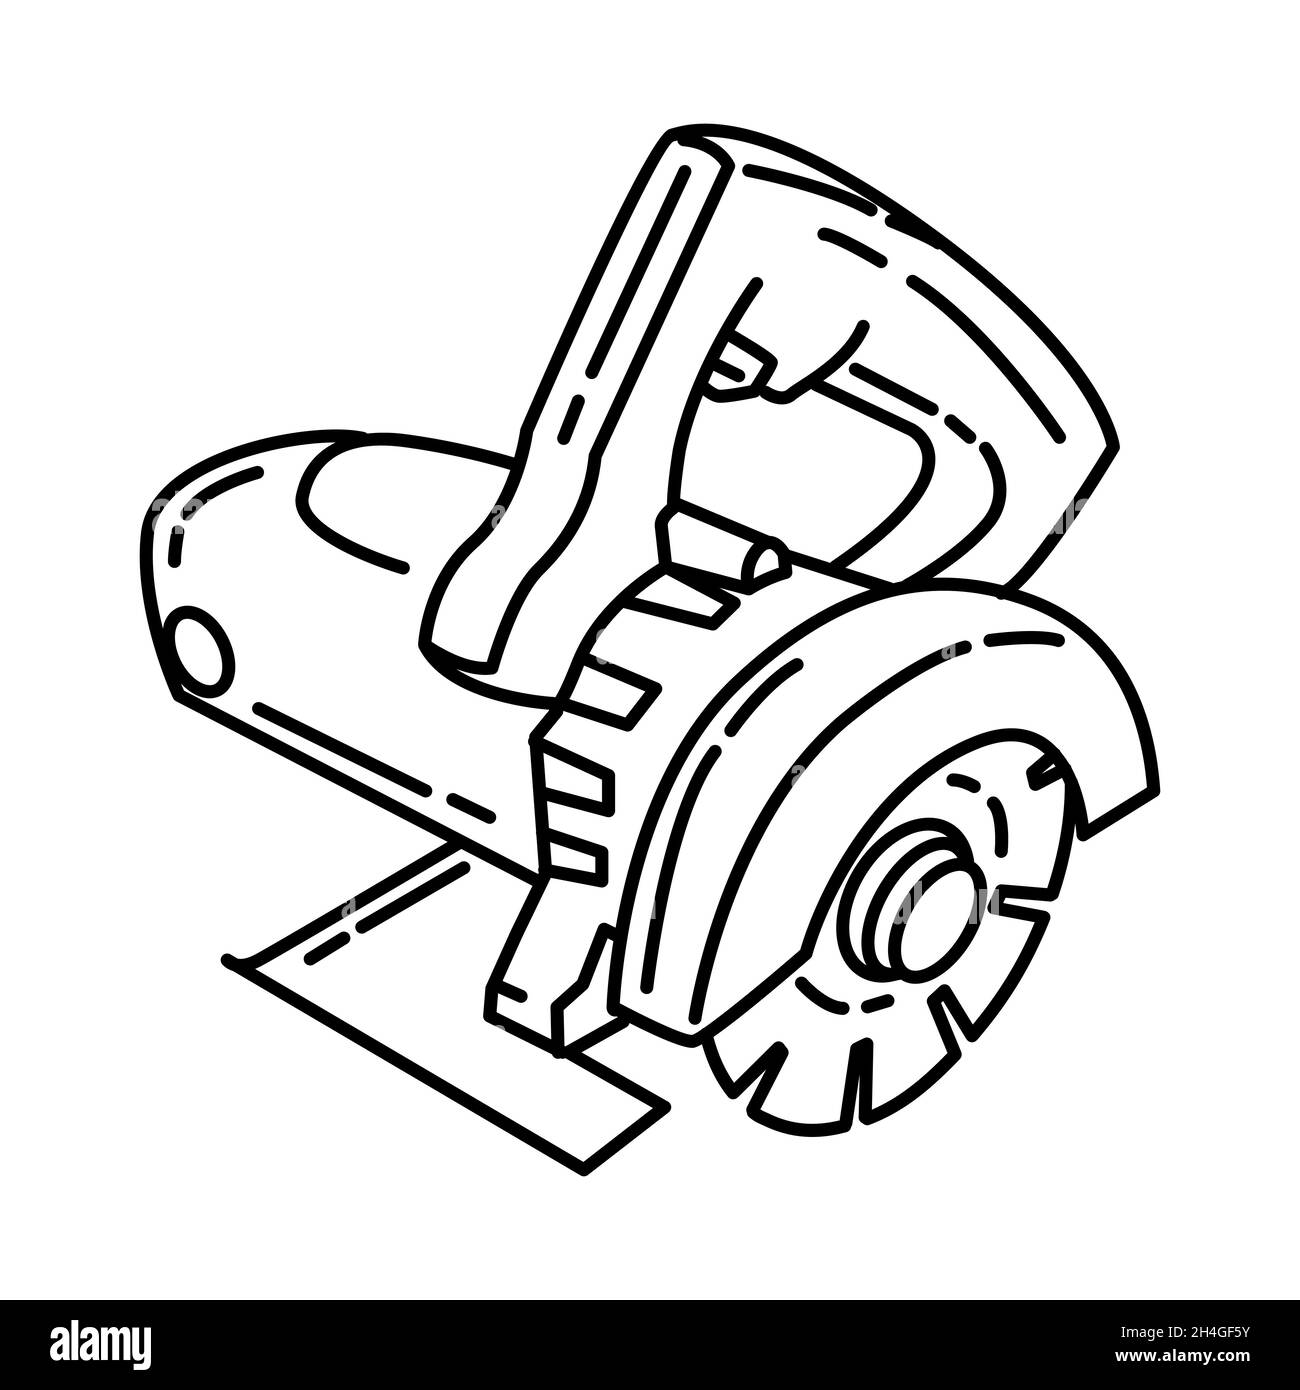 Ceramic Cutting Machine Part of Contractor Material and Equipment Device Hand Drawn Icon Set Vector. Stock Vector